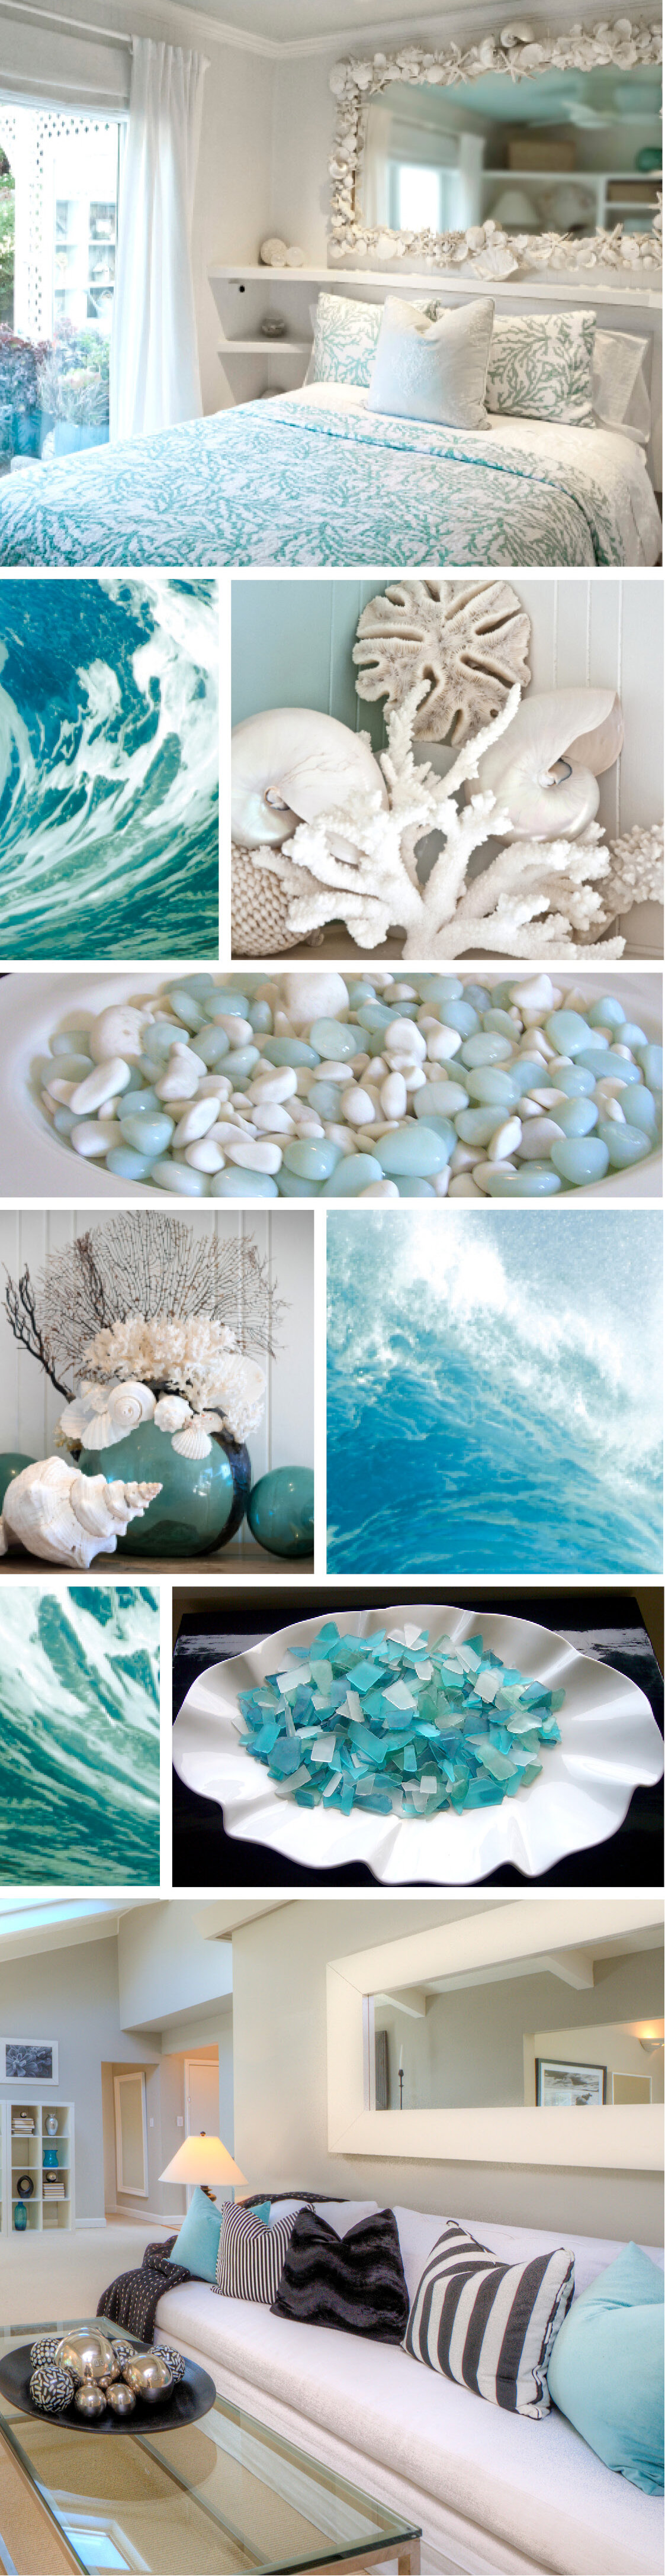 turquoise and aquas collage.jpg